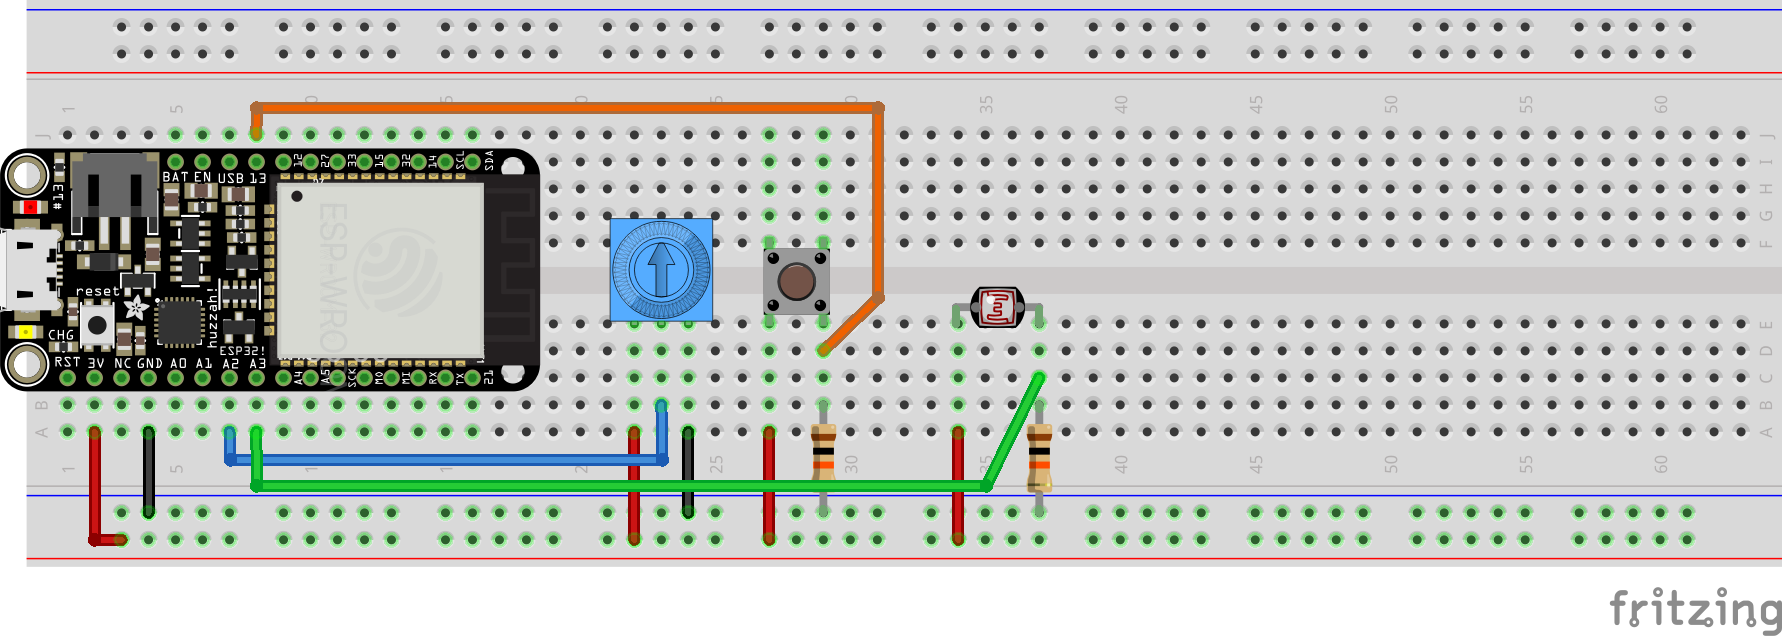 Adafruit ESP32 plugged into a breadboard with a potentiometer, a button and a photoresistor connected.